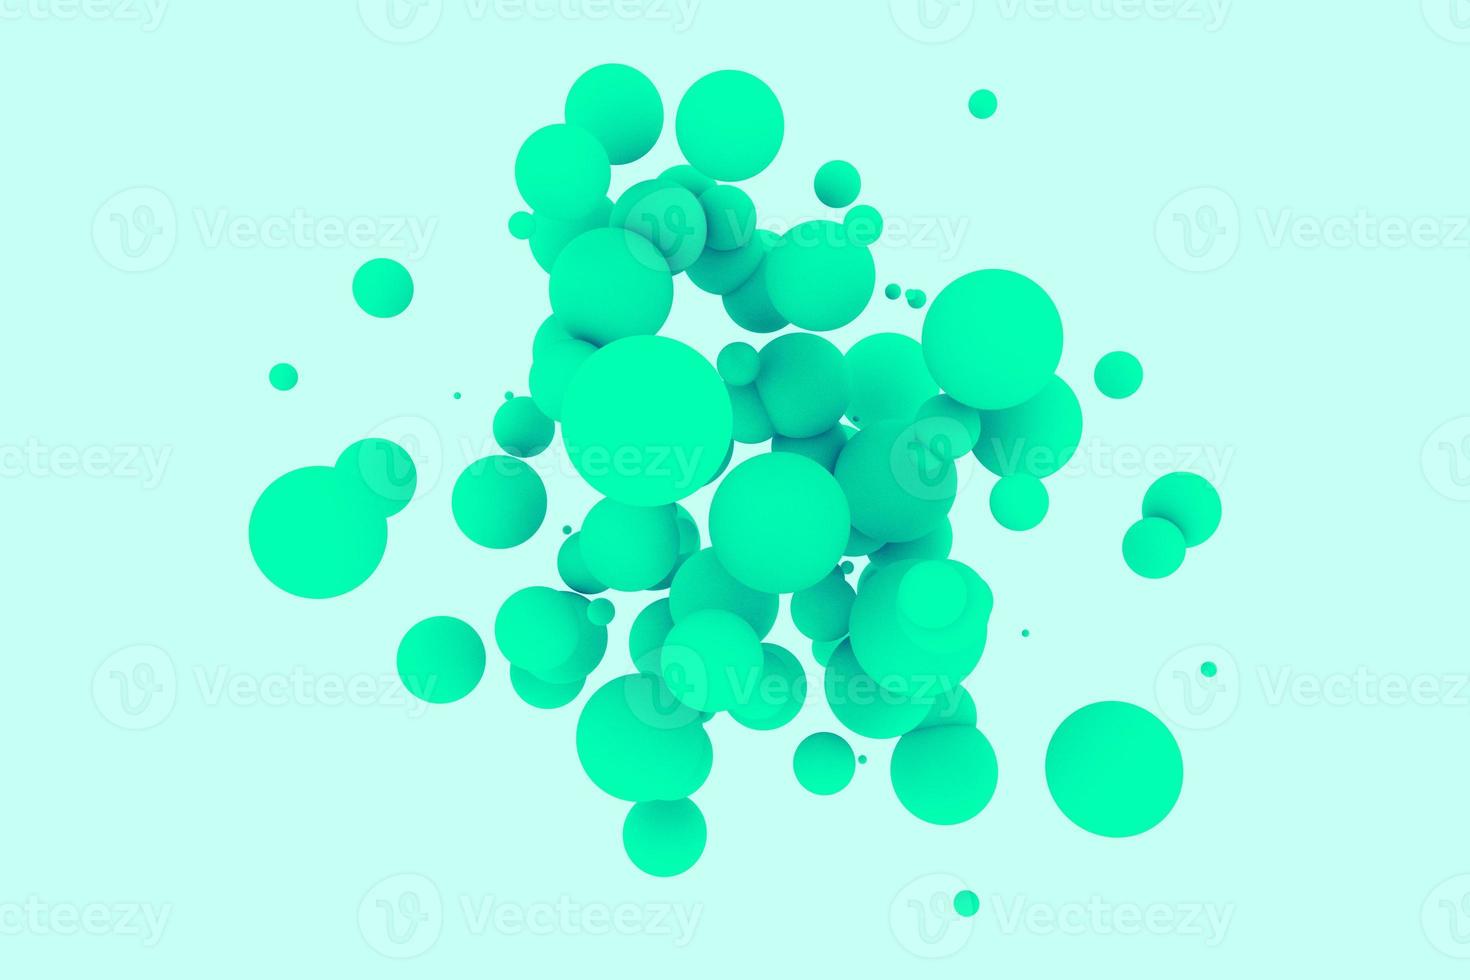 Green spheres decorative background. 3d rendering abstract texture. Balls with sprayed shadow illustration photo